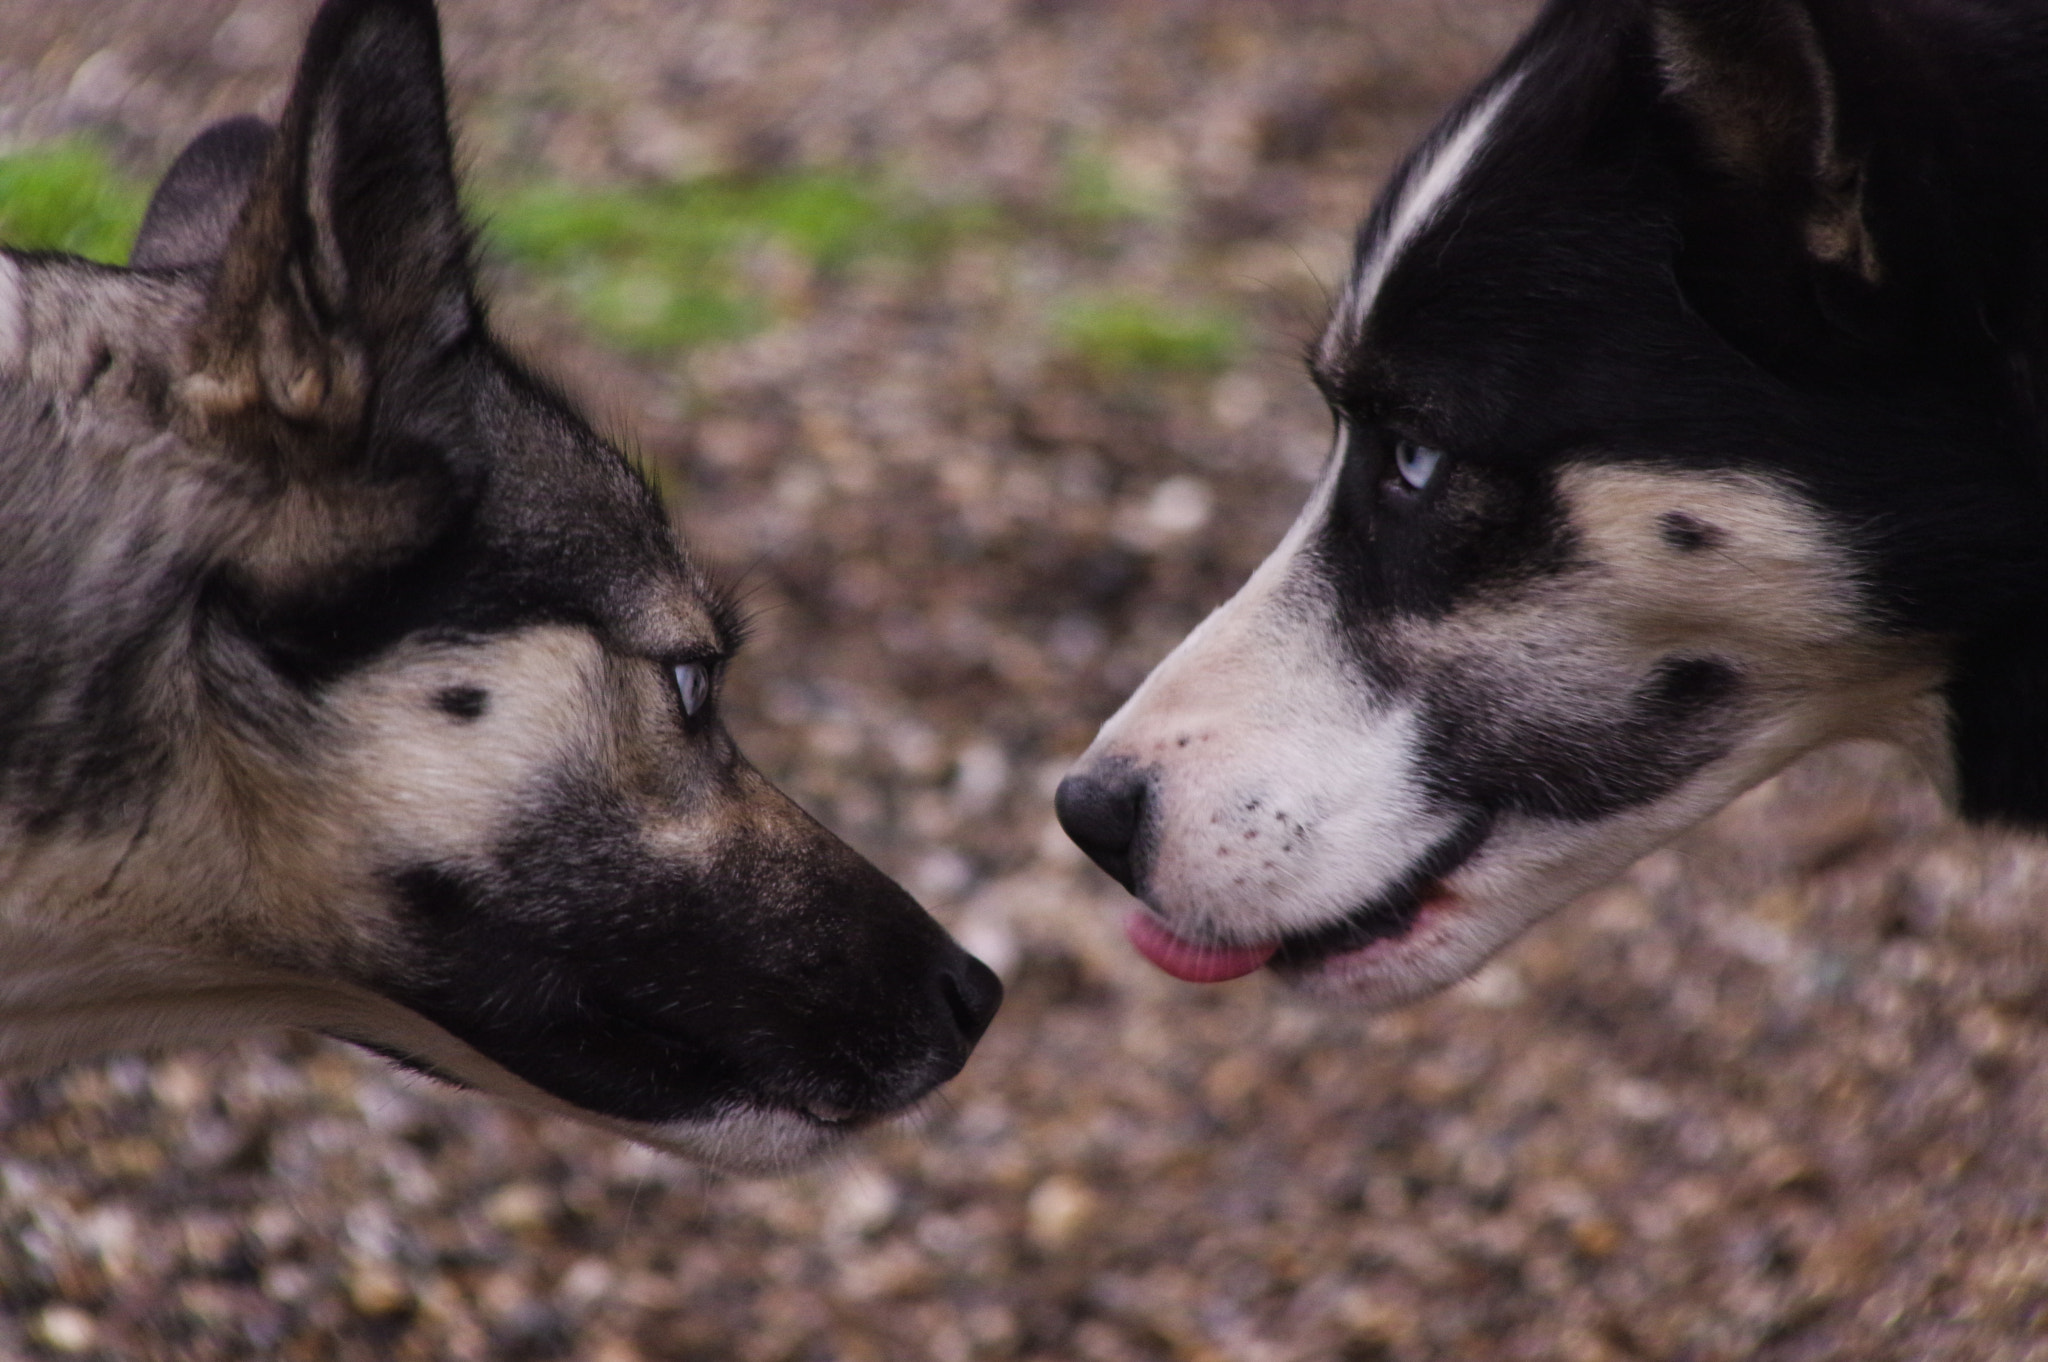 Pentax K-3 + Sigma sample photo. Bet you can't catch my tongue photography